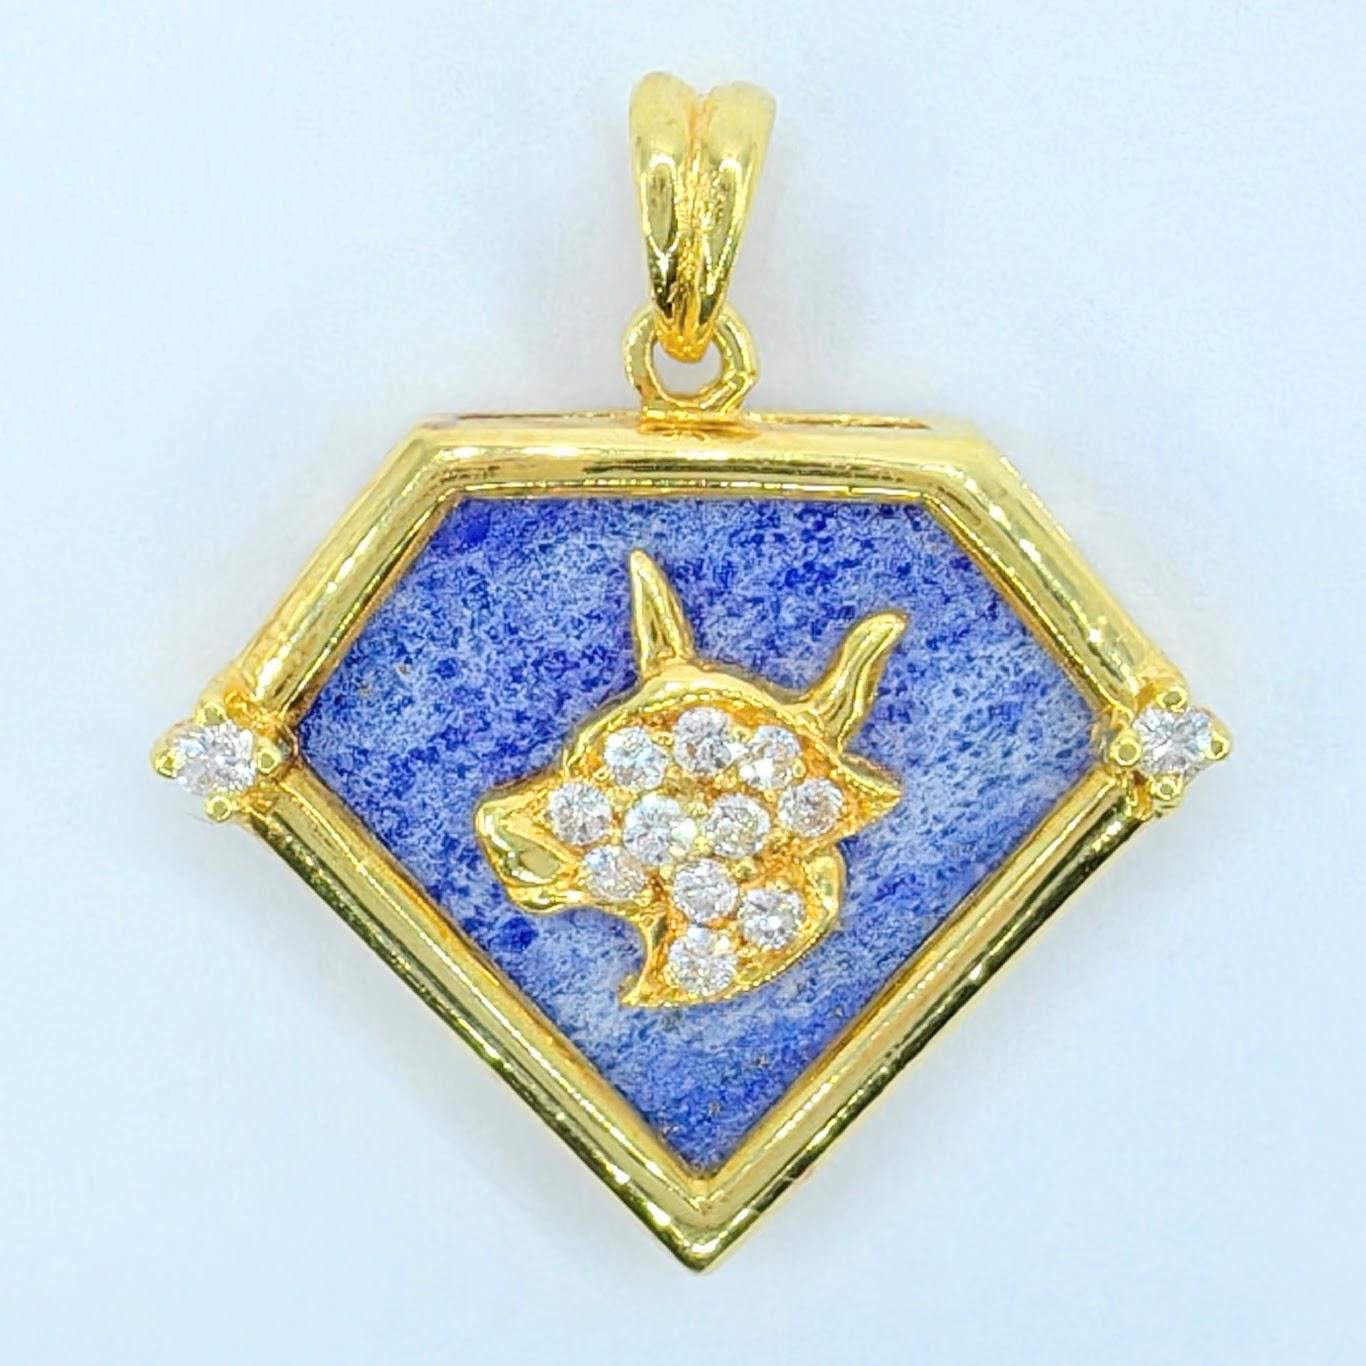 Introducing the Vintage 90's Taurus Blue Lapis Diamond Necklace Pendant in 20K Yellow Gold. This pendant is a true embodiment of celestial beauty and timeless elegance.

At the heart of this pendant lies a beautifully crafted Taurus zodiac motif in